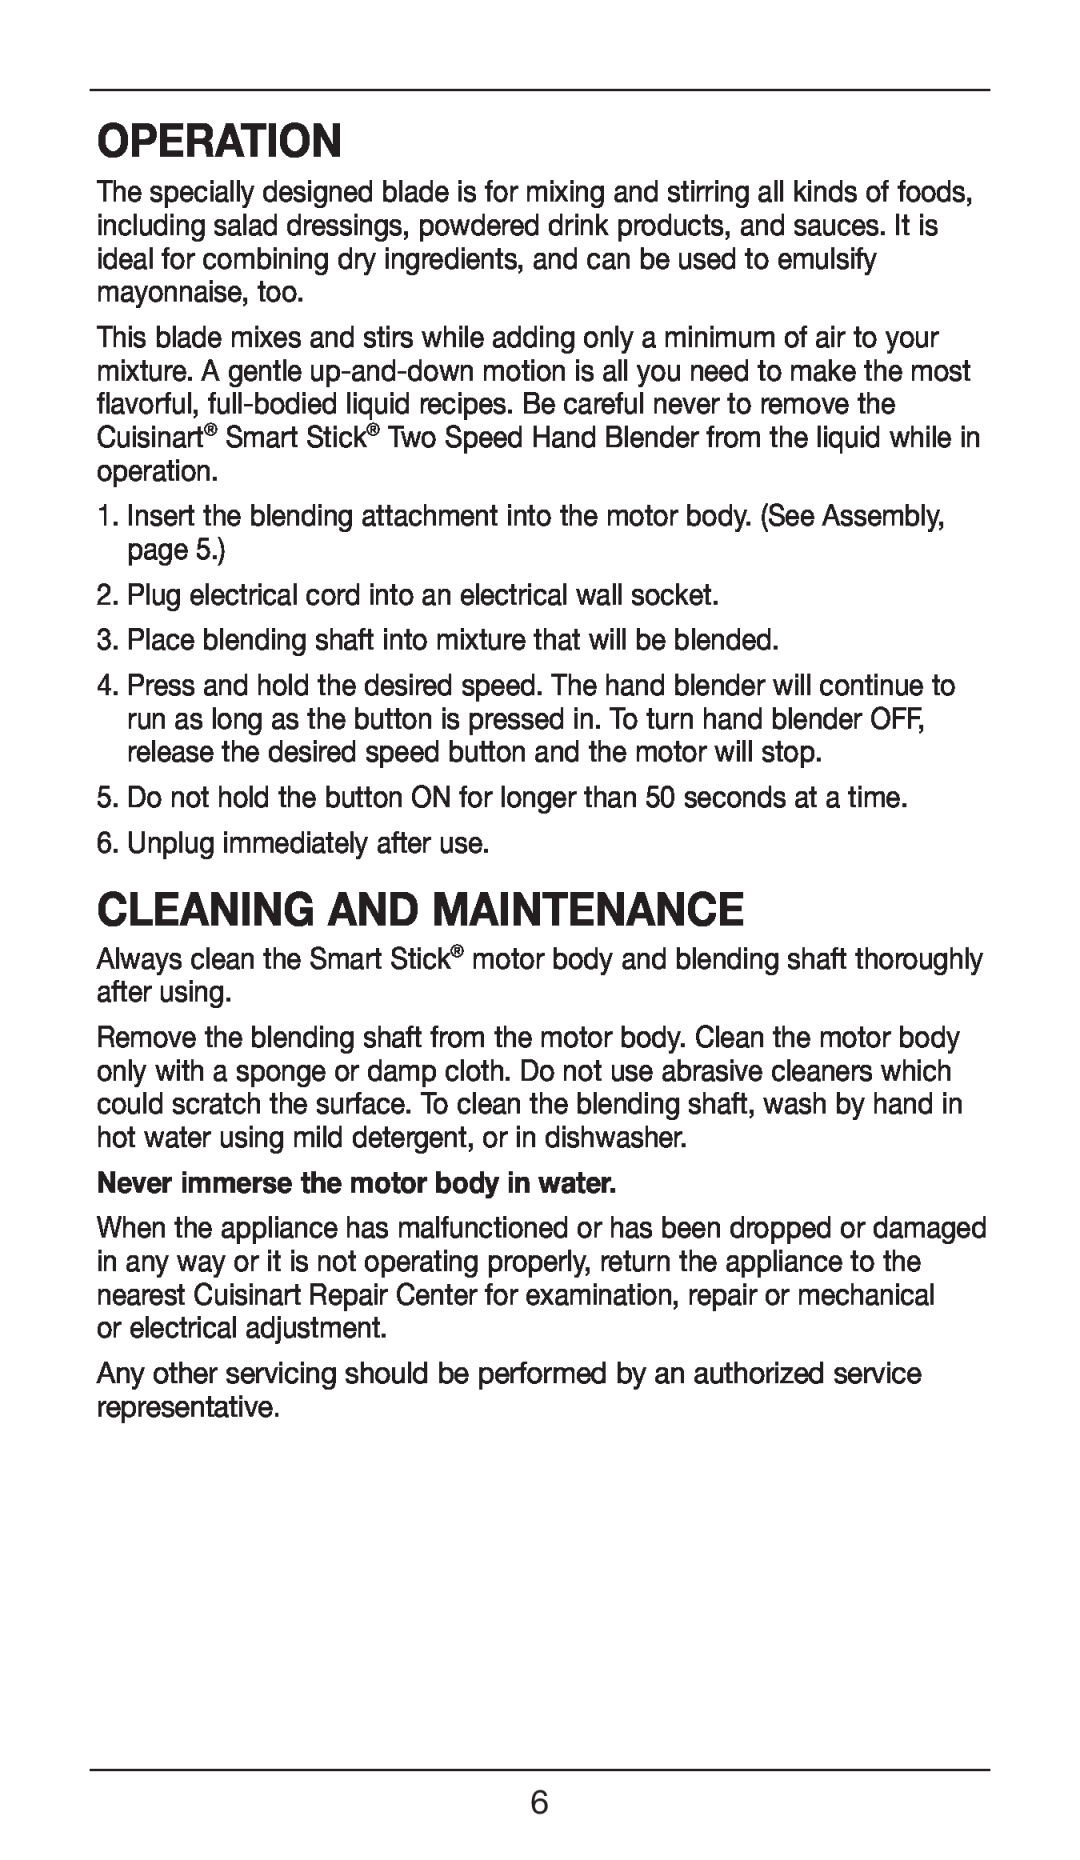 Cuisinart CSB-75 manual Operation, Cleaning And Maintenance, Never immerse the motor body in water 